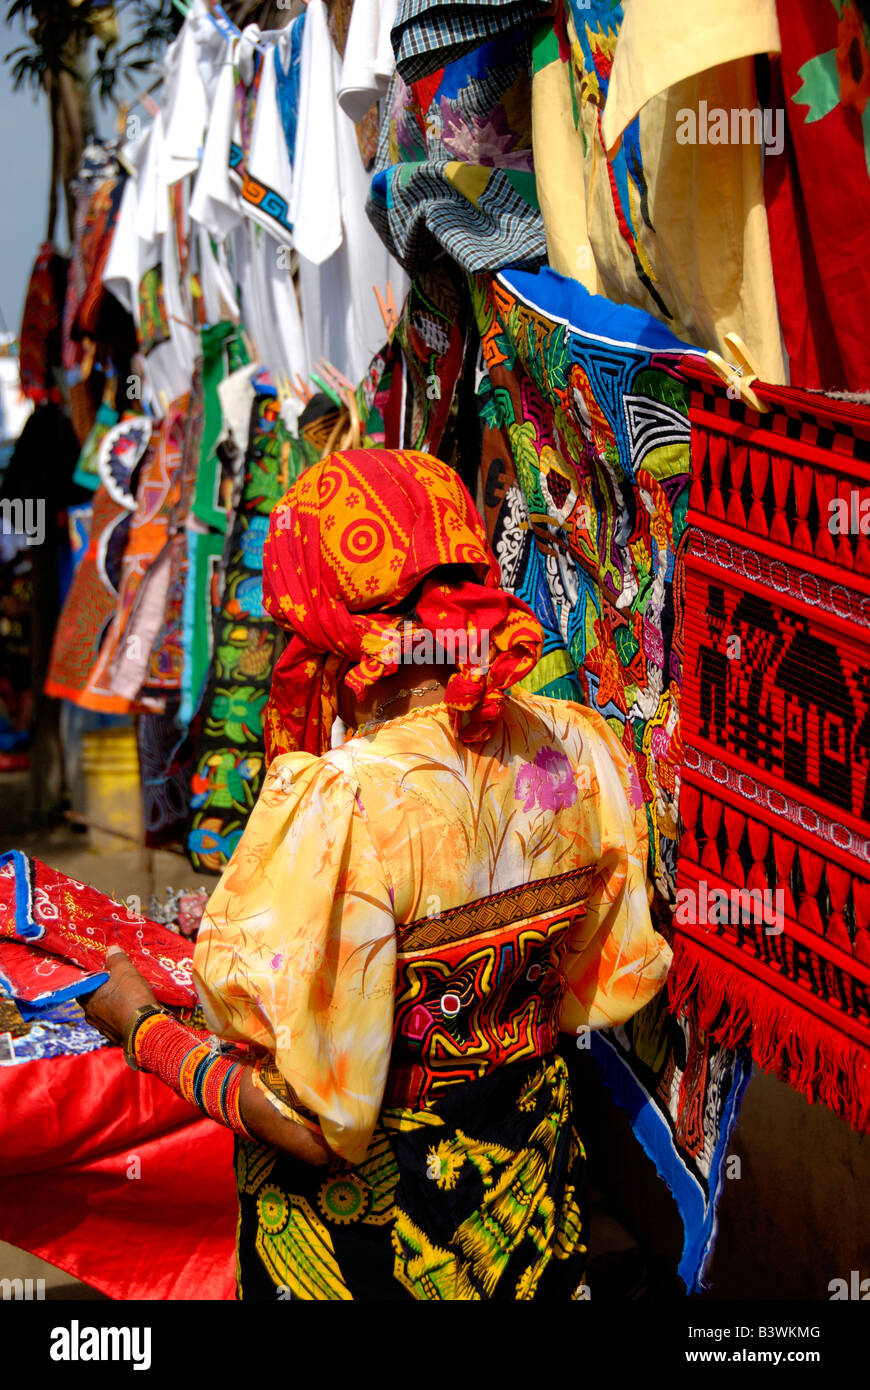 Central America, Panama, San Blas Islands. Kuna Indian in traditional attire in front of colorful hand stitched molas for sale. Stock Photo